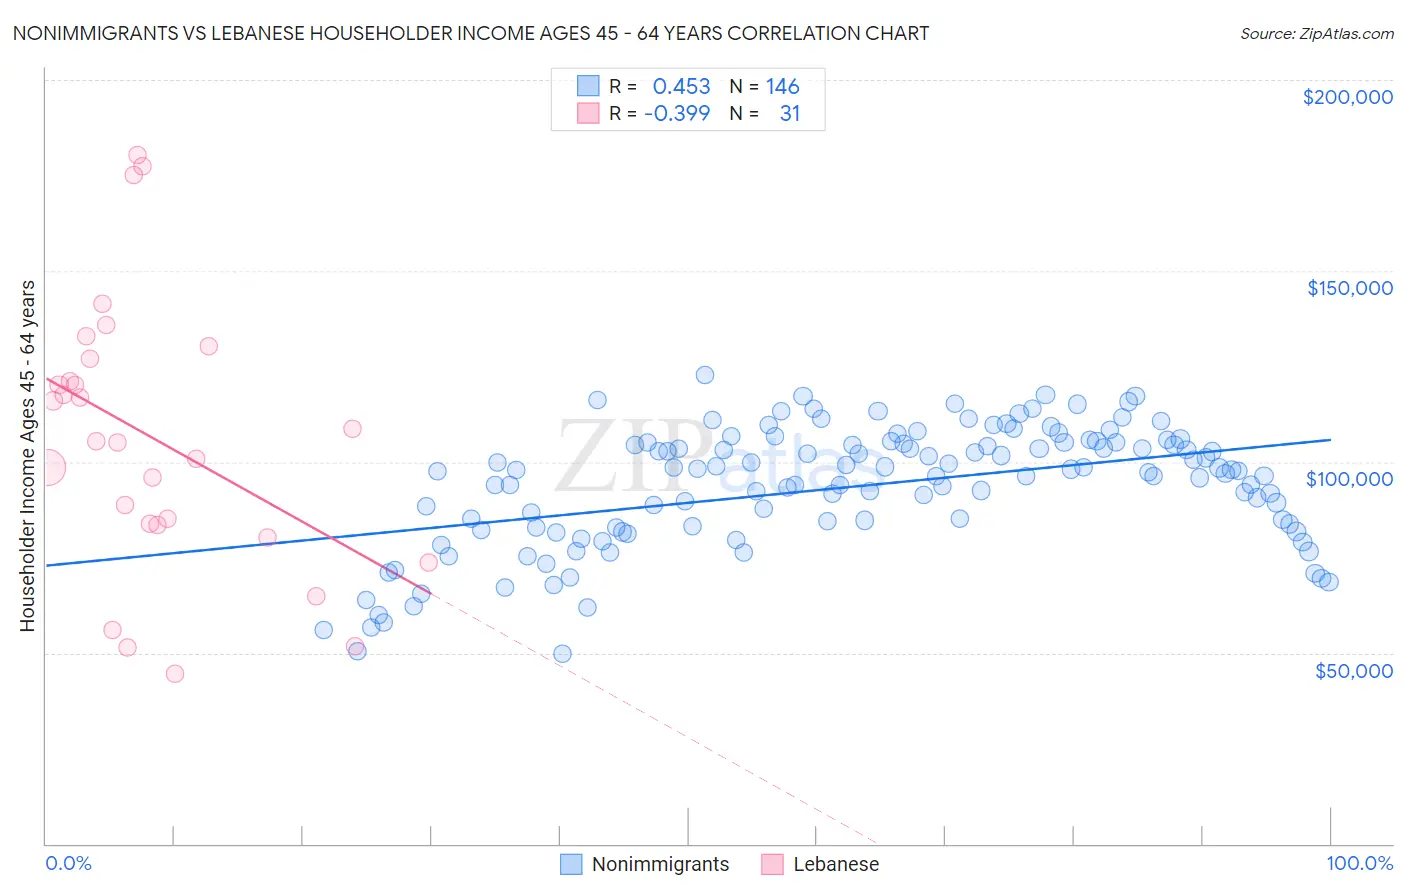 Nonimmigrants vs Lebanese Householder Income Ages 45 - 64 years